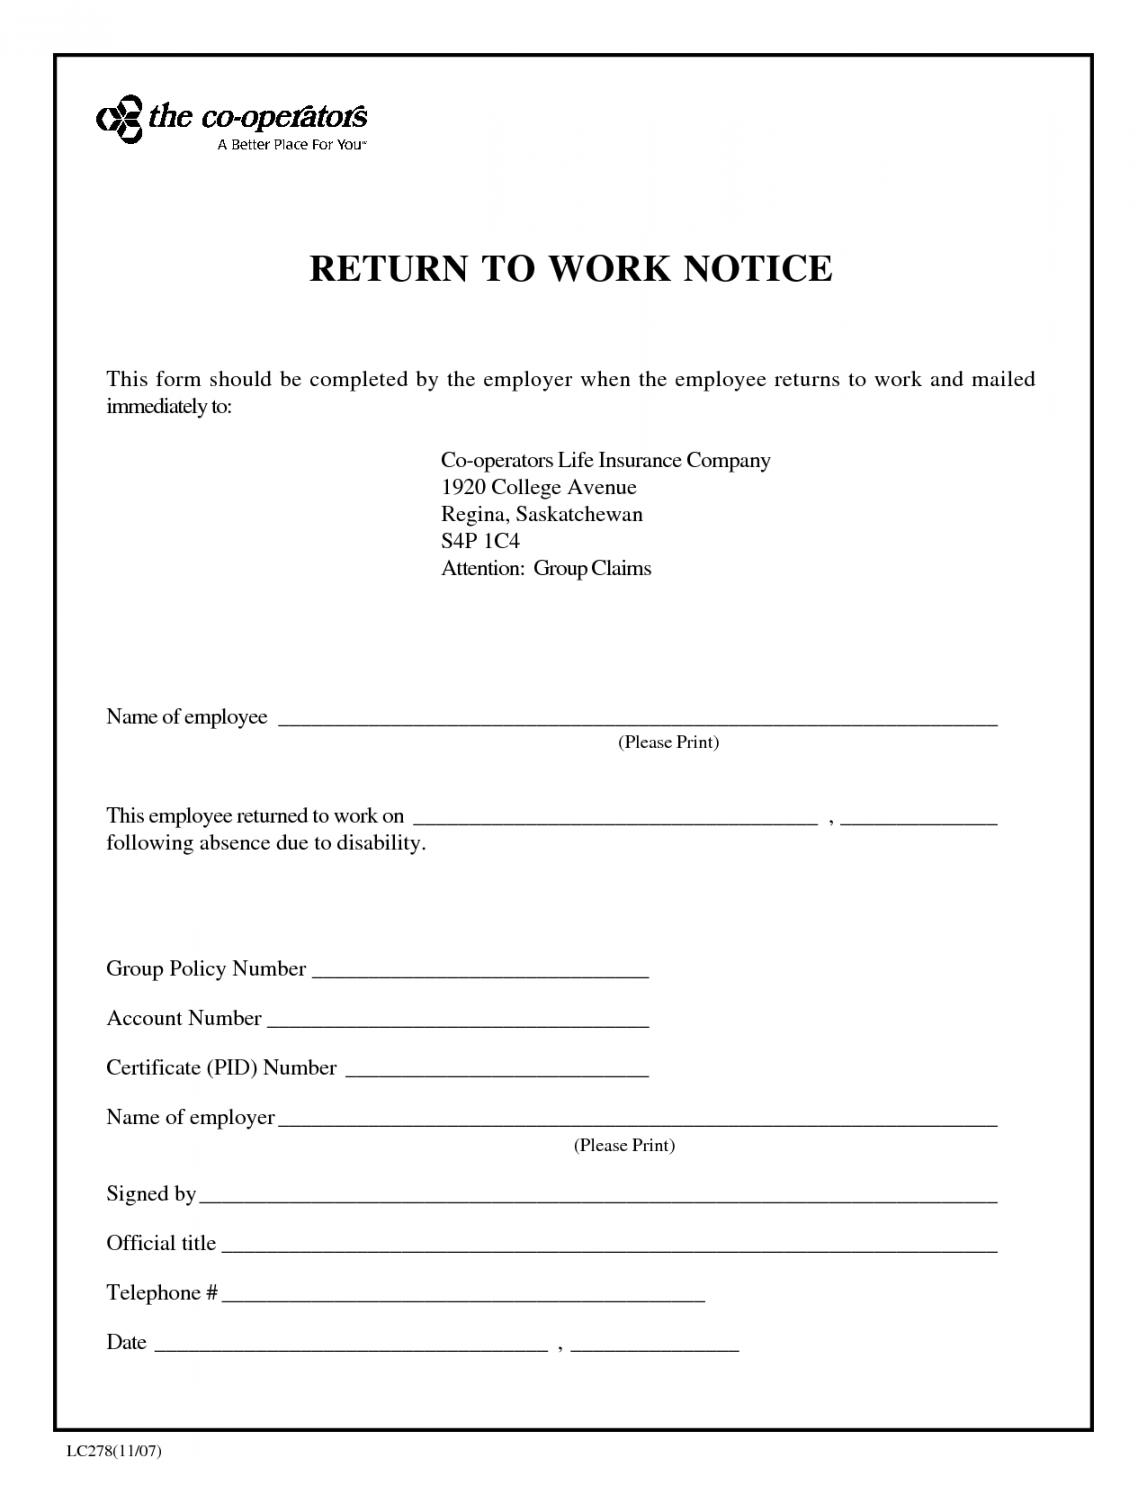 Blank Return To Work Note - FREE DOWNLOAD  Doctors note template